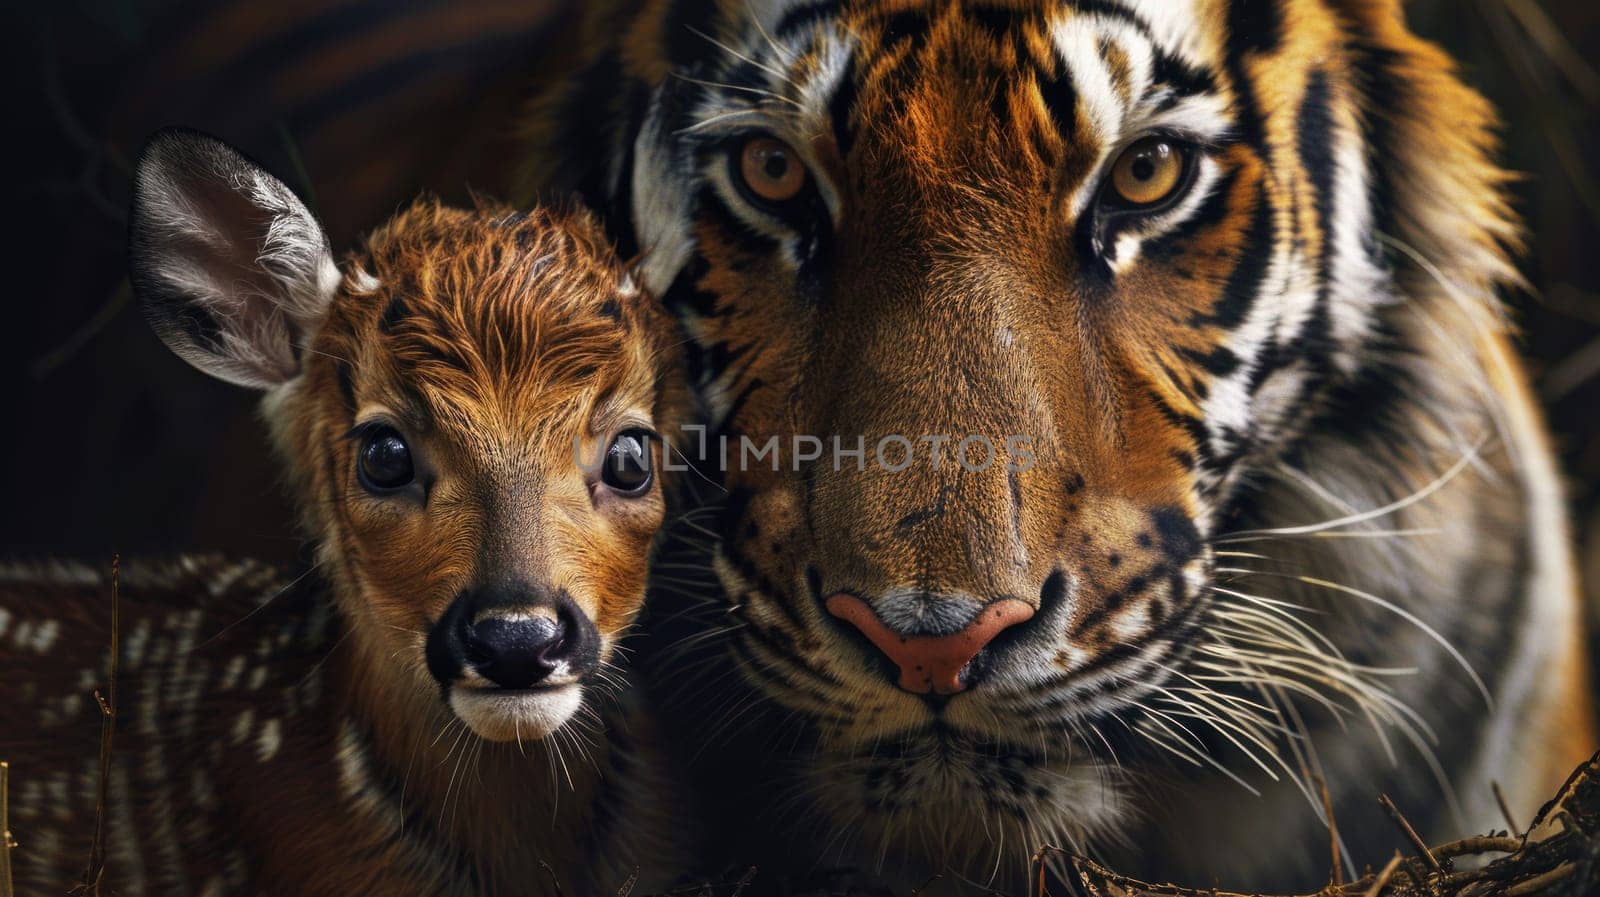 A baby deer is standing next to a tiger. Concept of curiosity and wonder about the relationship between the two animals by golfmerrymaker